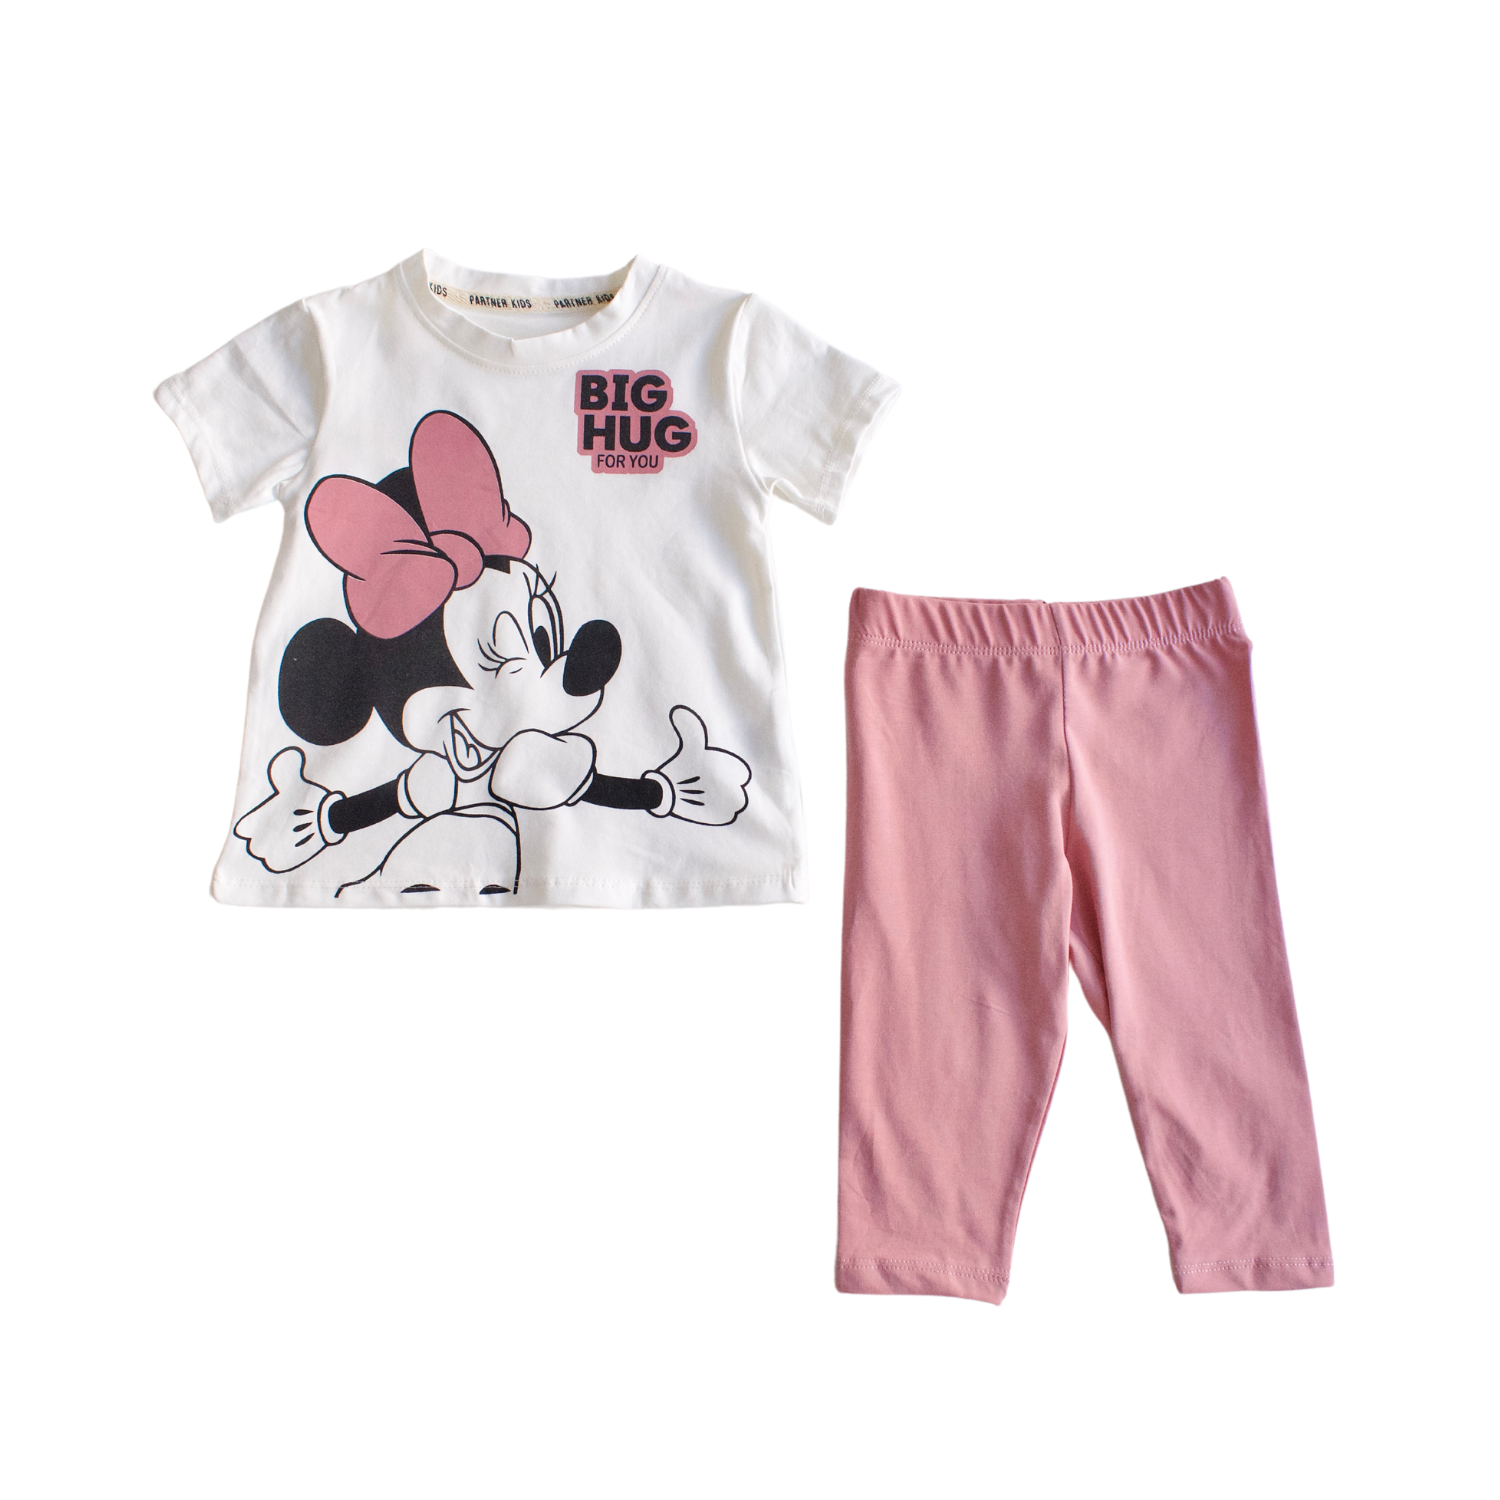 Thumbs Up Minnie's Casual Set